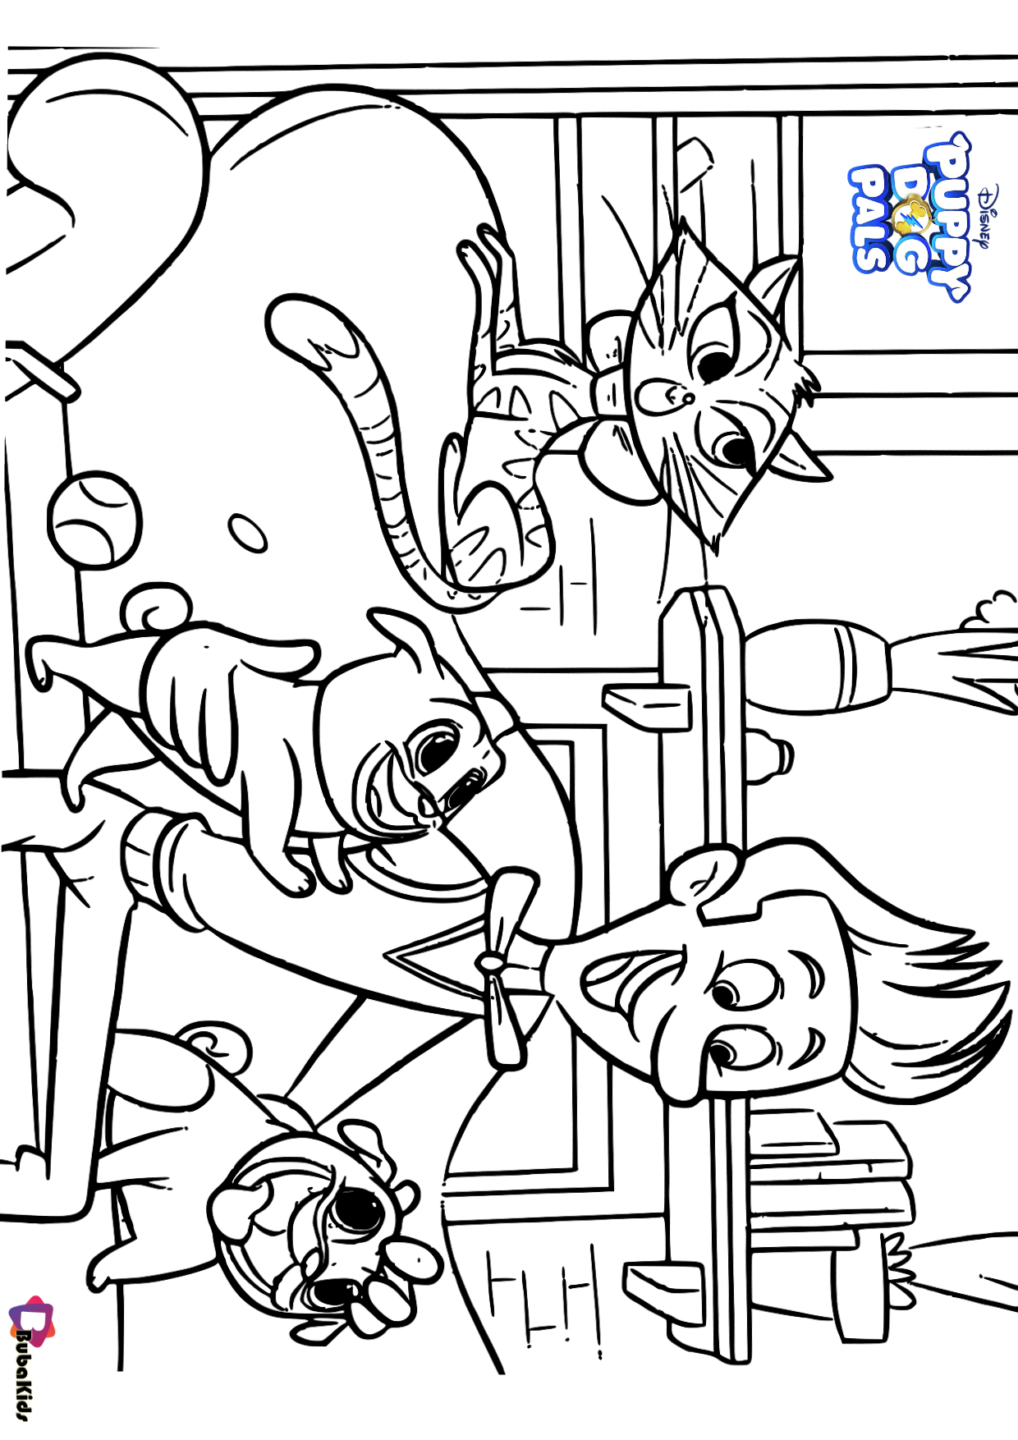 Puppy Dog Pals Disney TV Serials coloring pages